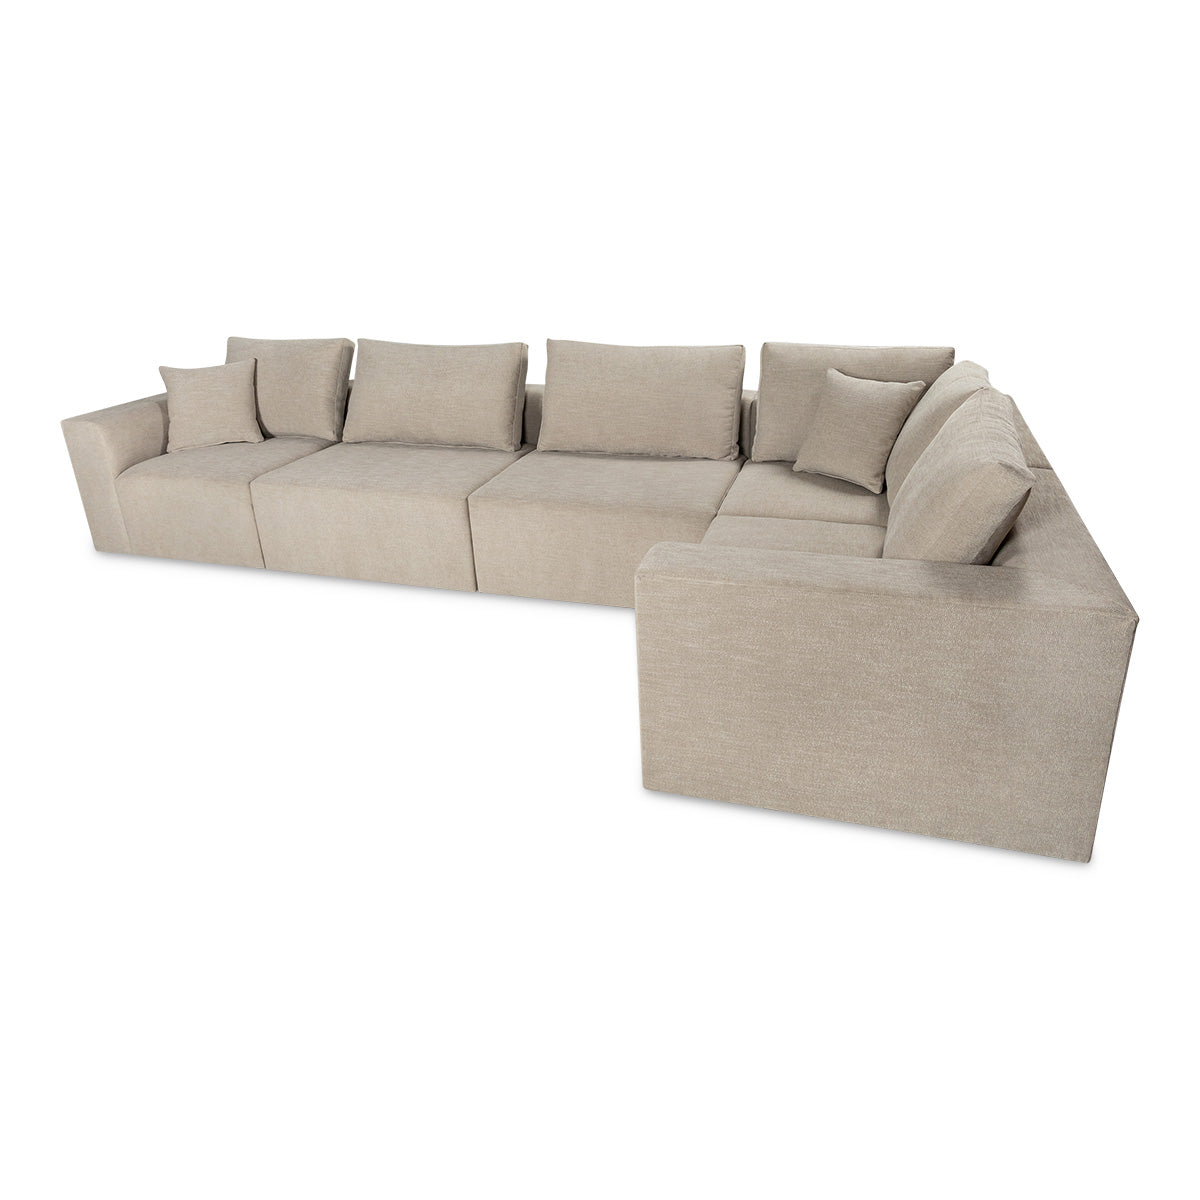 Vail Sectional in Burlap